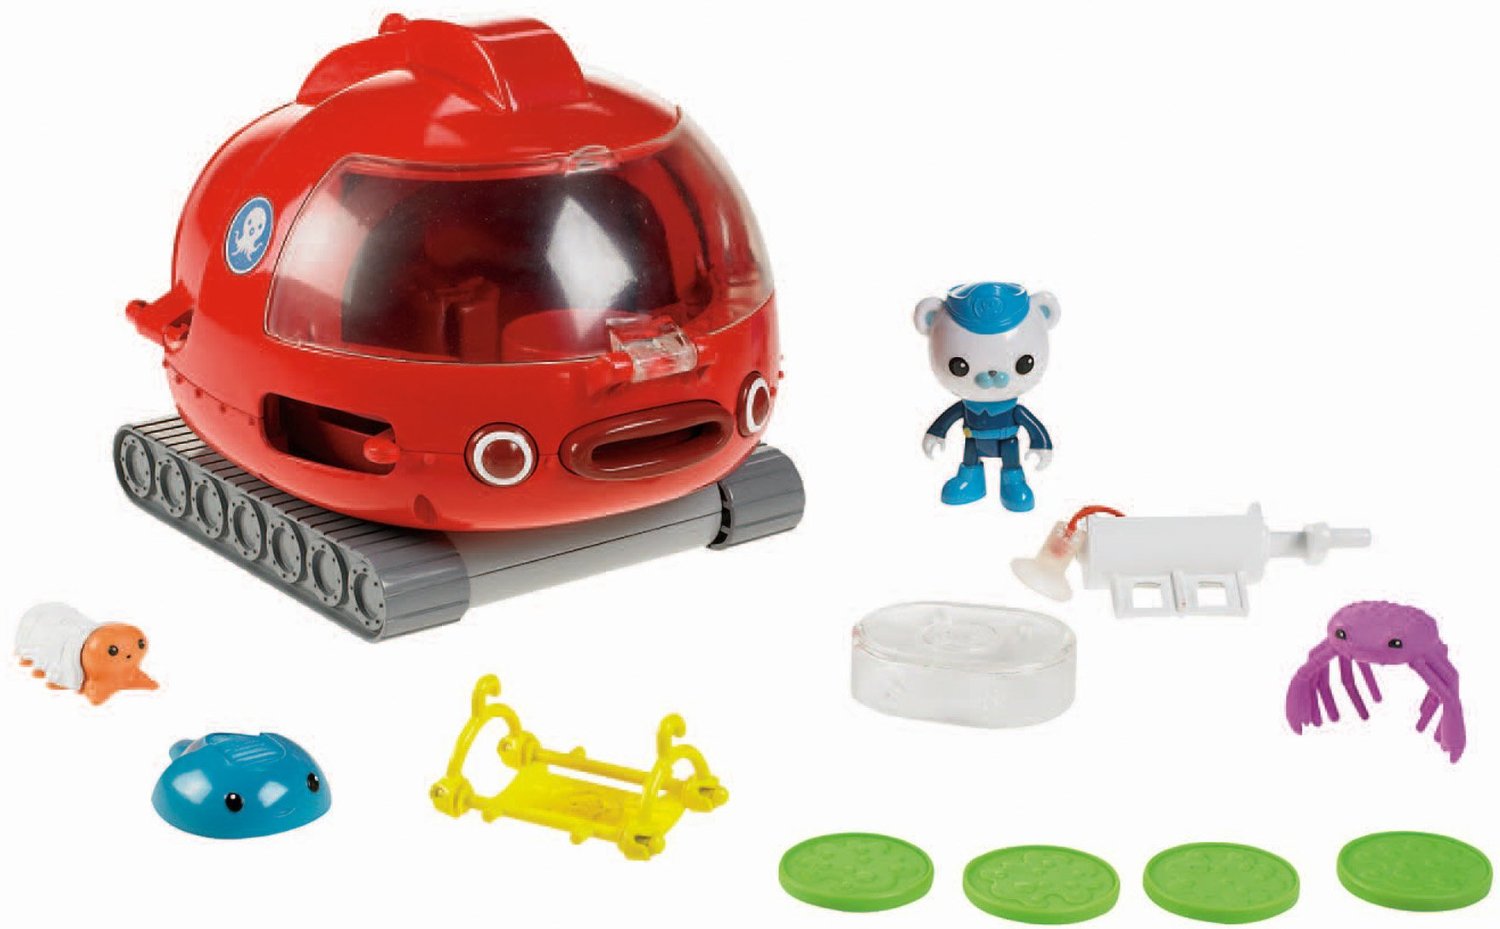 Why Are Octonauts Toys So Expensive